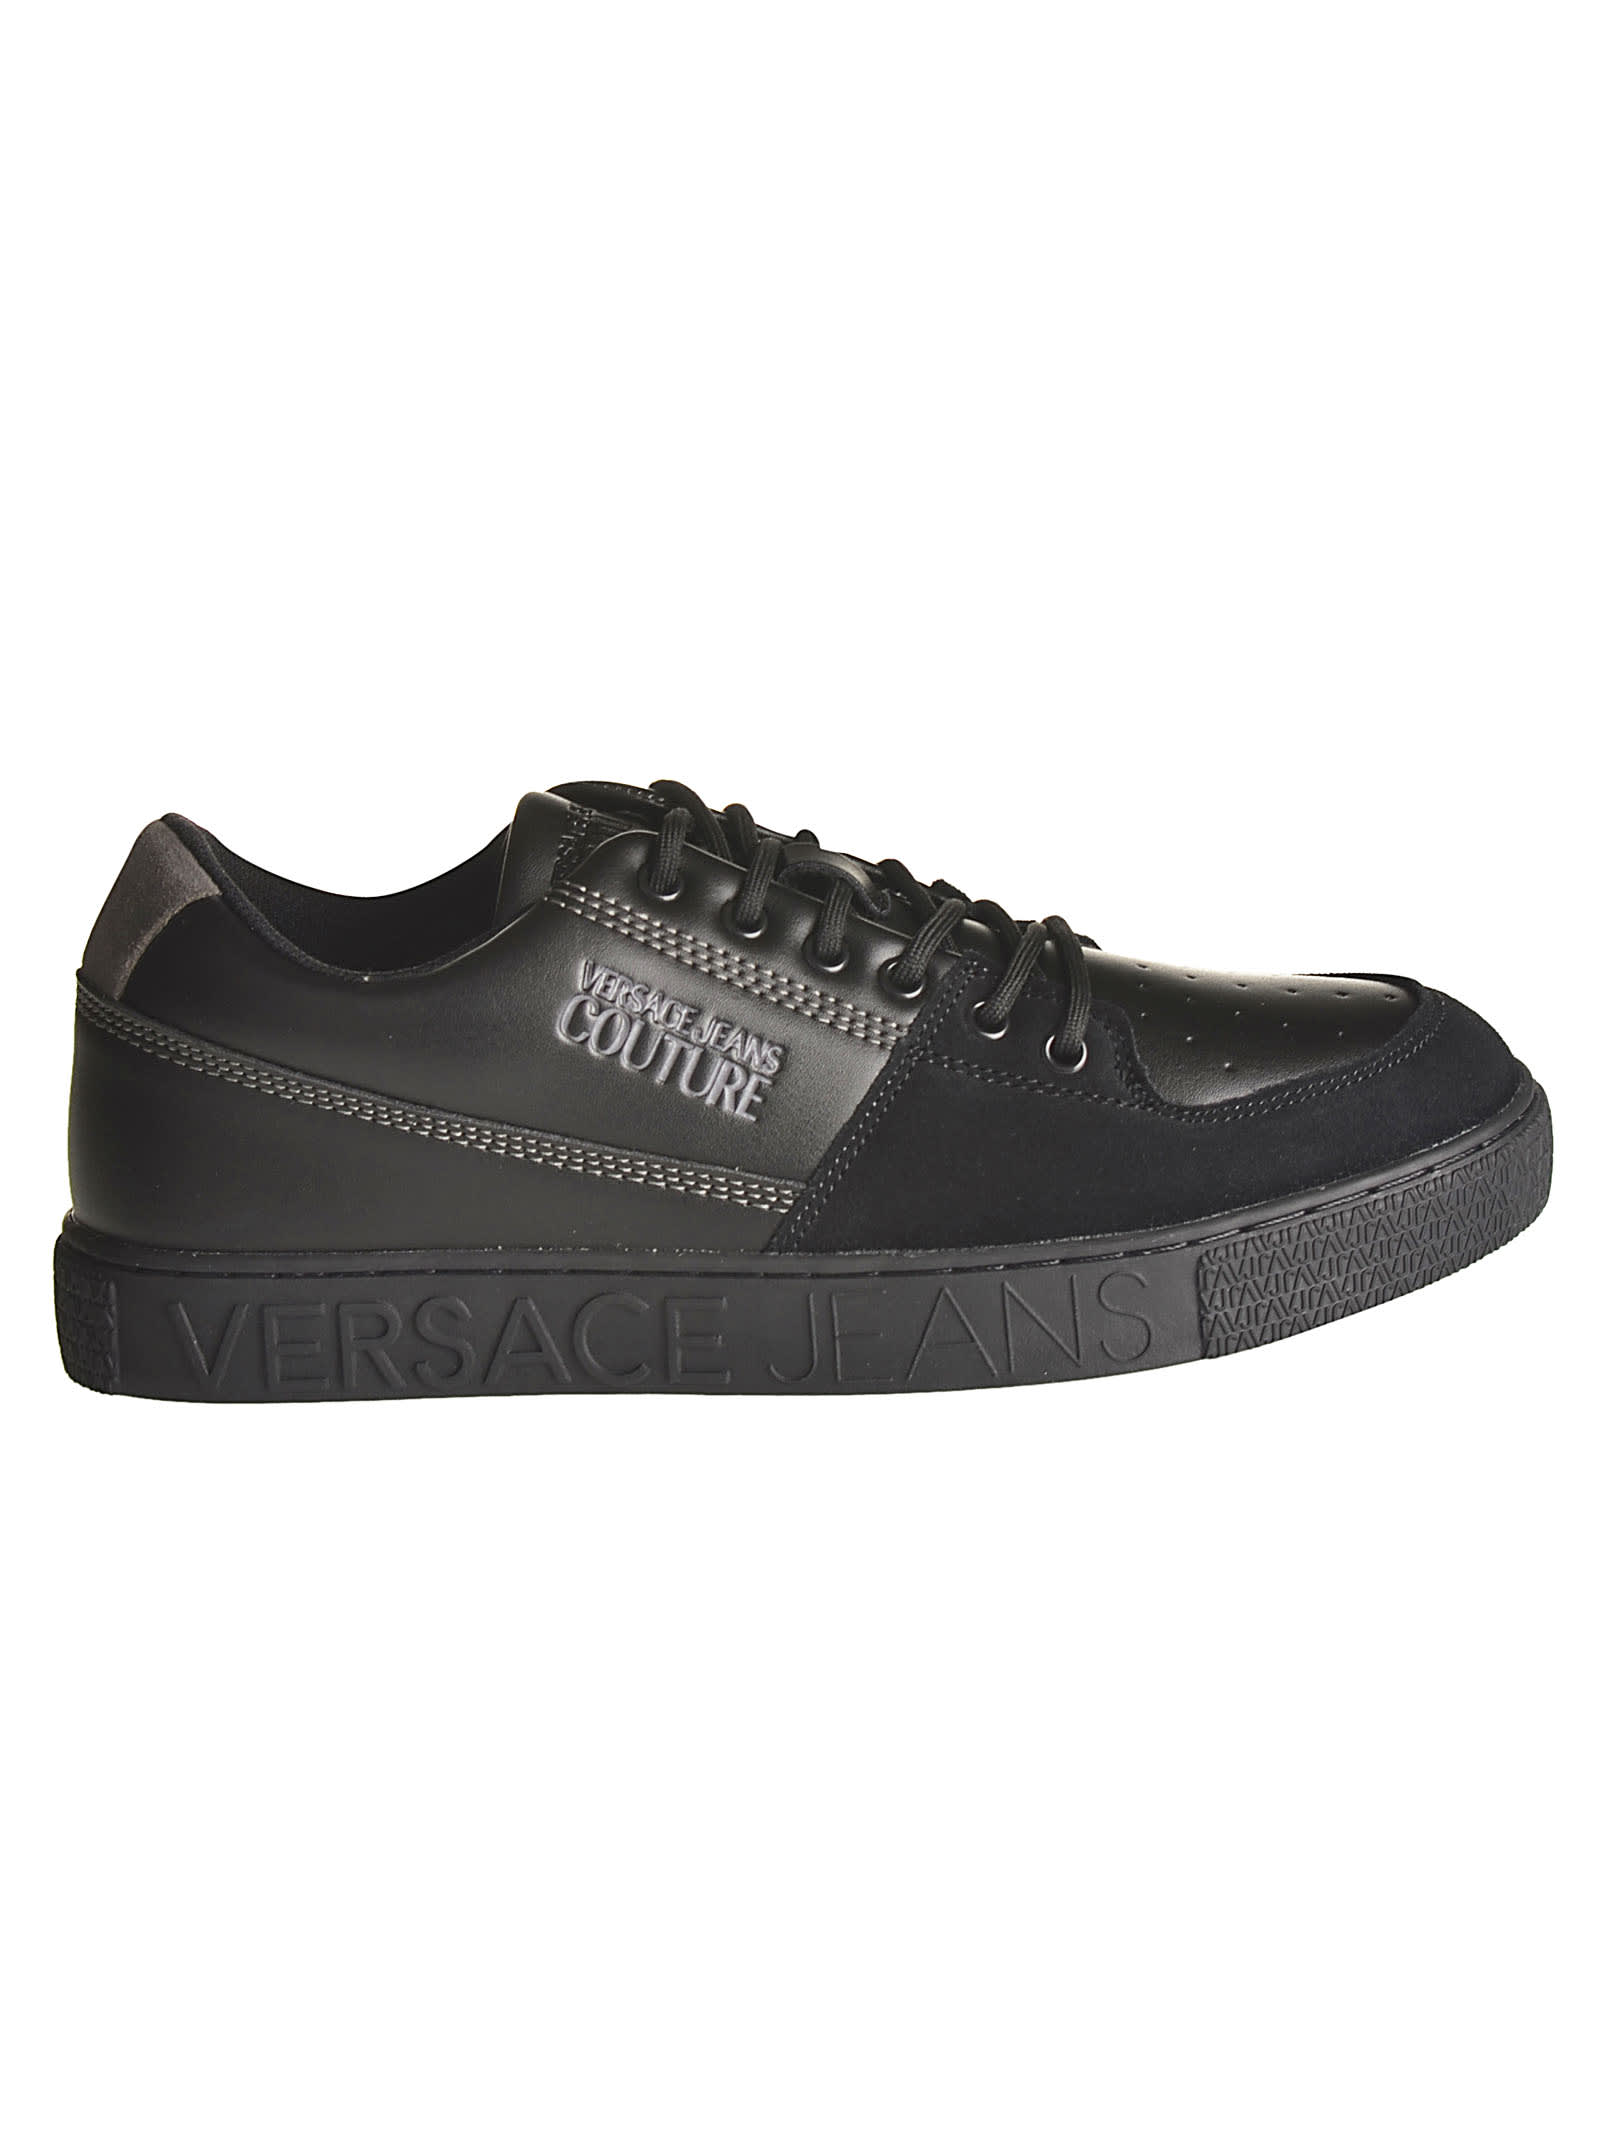 versace jeans shoes price